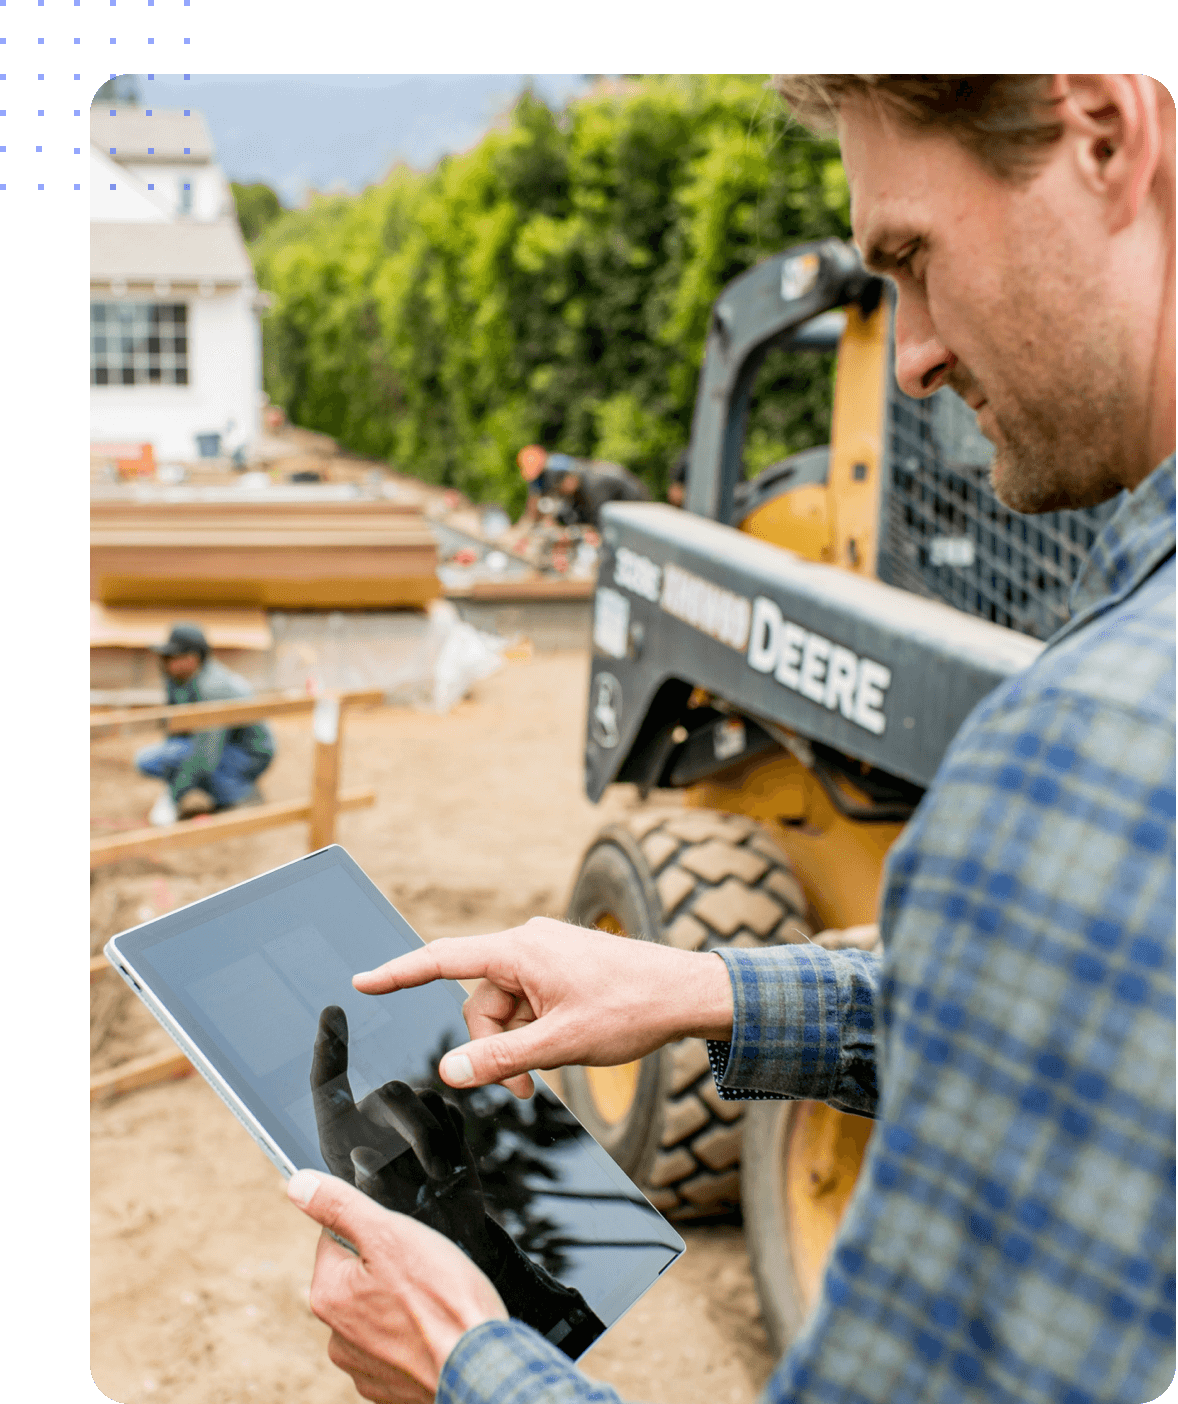 A field service manager exploring Hubstaff workforce productivity features on a tablet at a job site